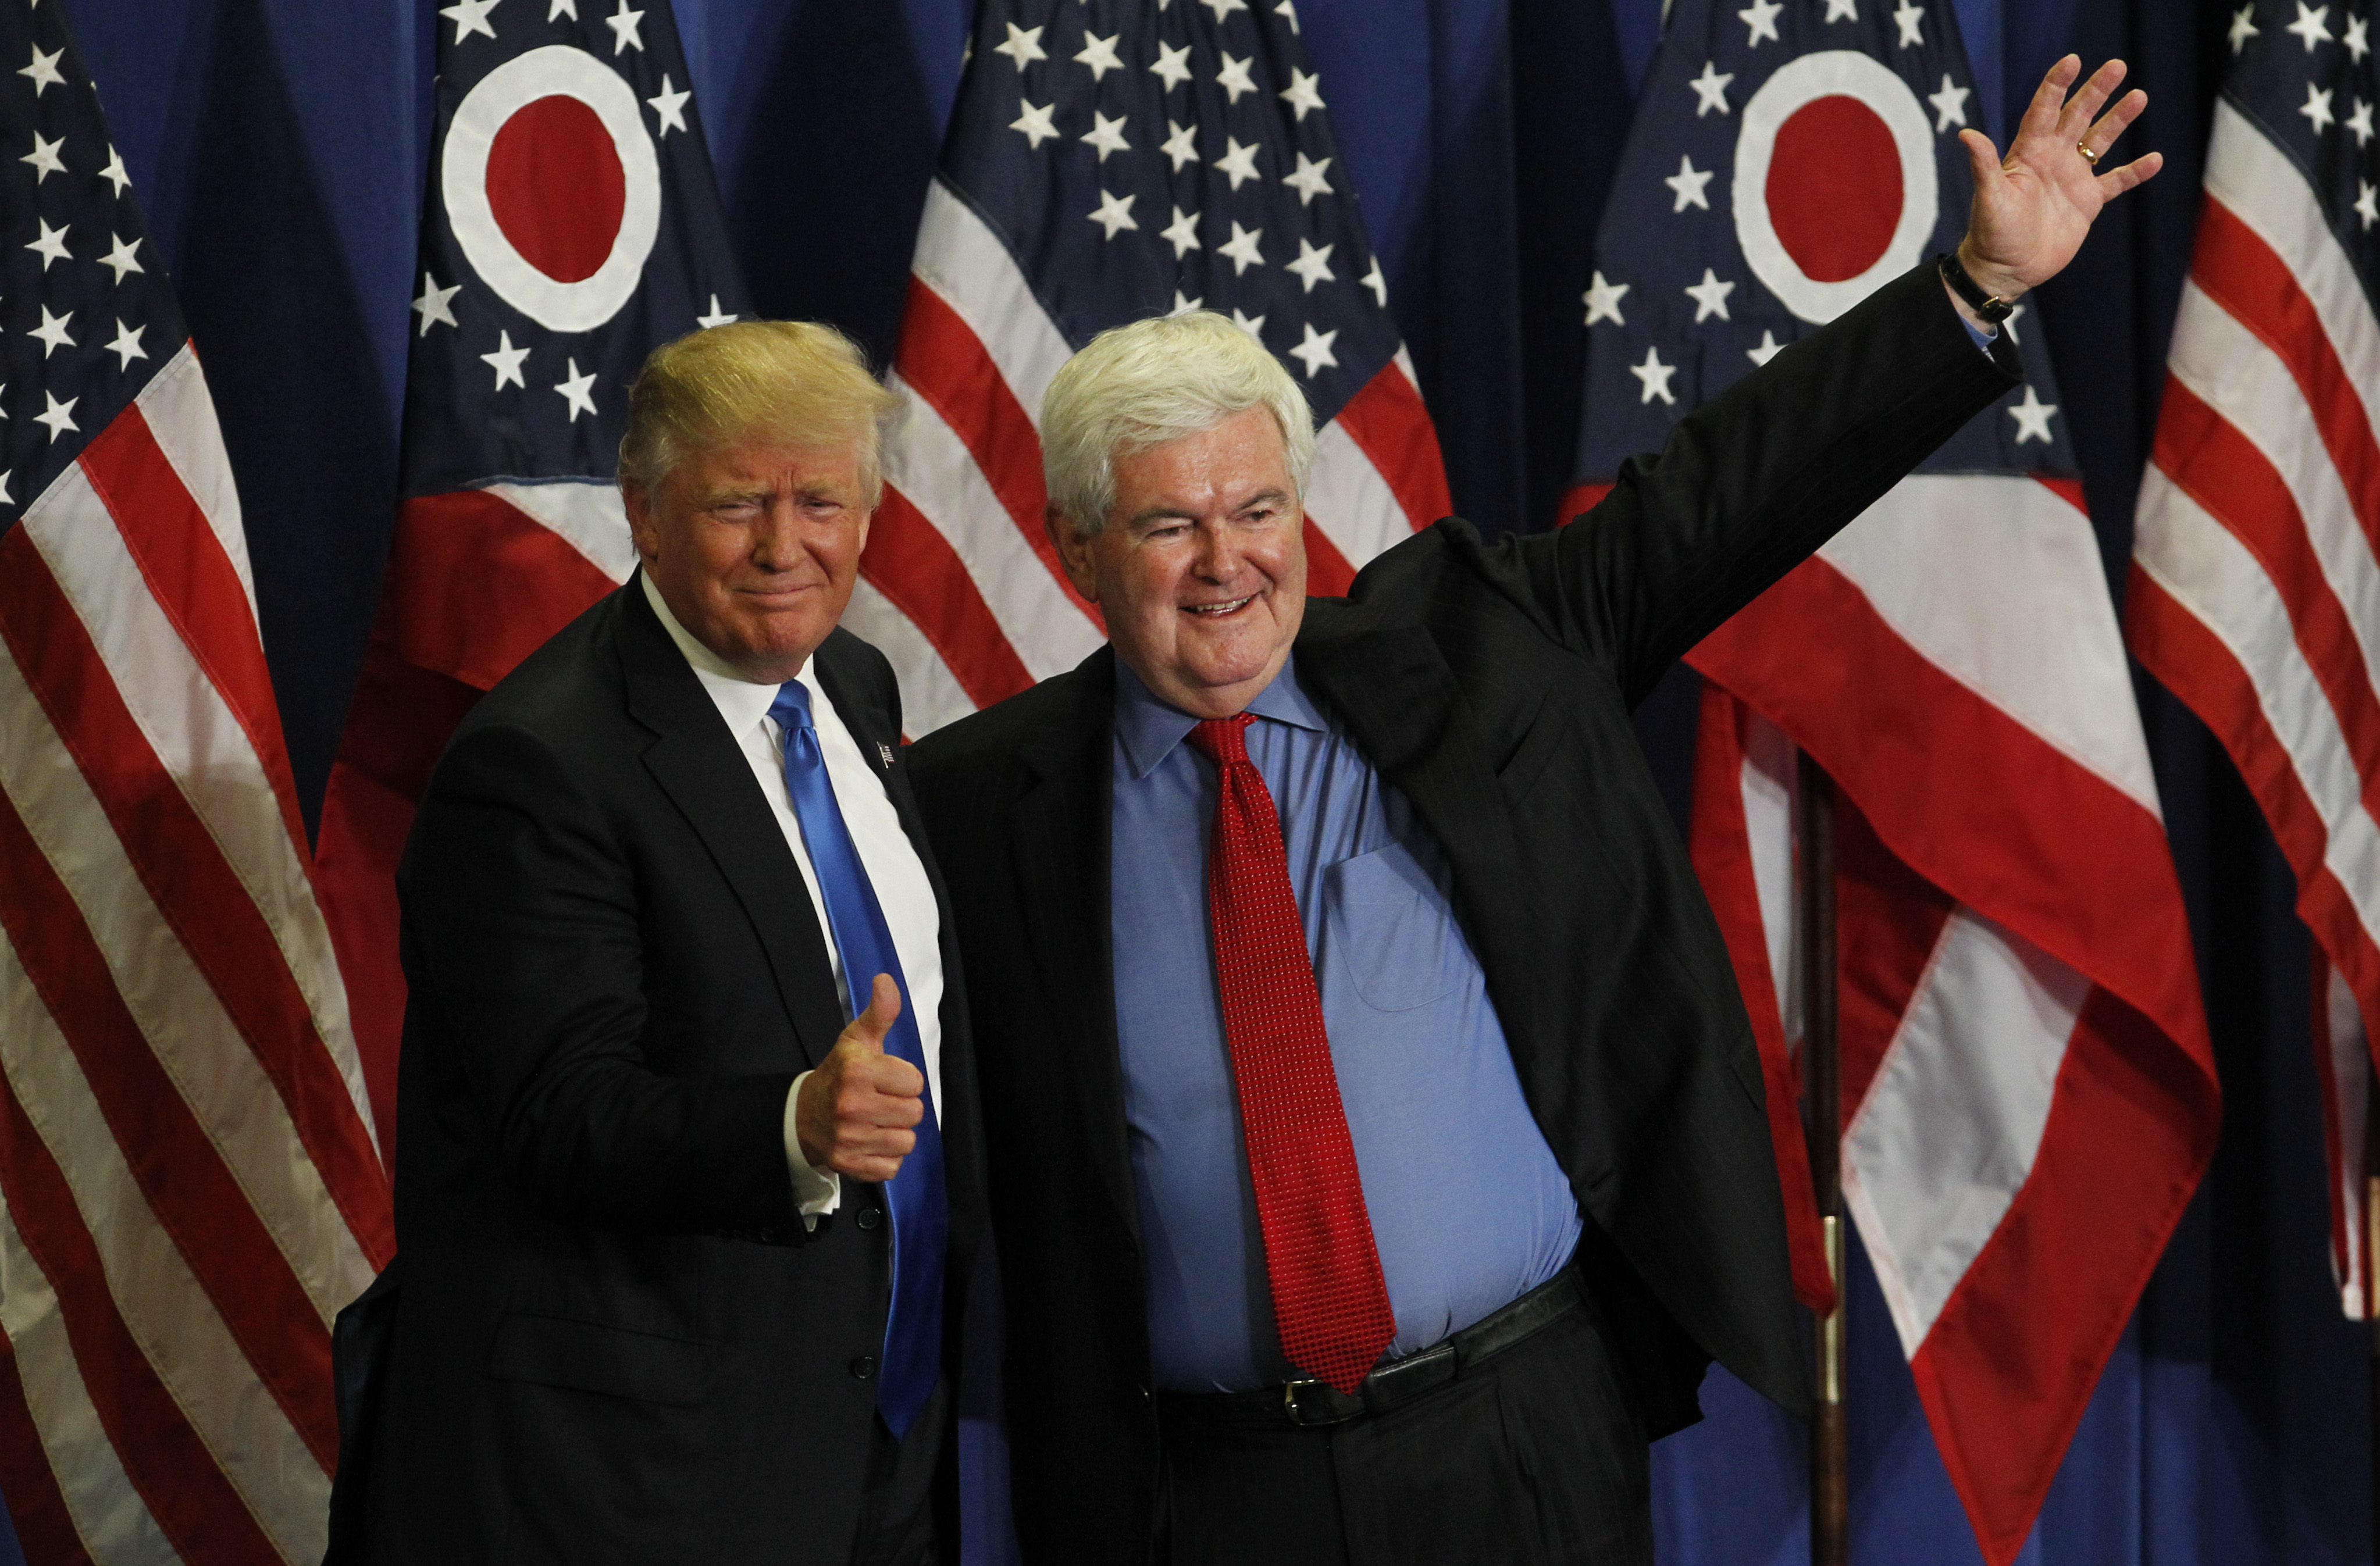 Former Speaker of the House Newt Gingrich (R) introduces Republican Presidential candidate Donald Trump during a rally at the Sharonville Convention Center in Cincinnati on July 6, 2016. (John Sommers II—Getty Images)